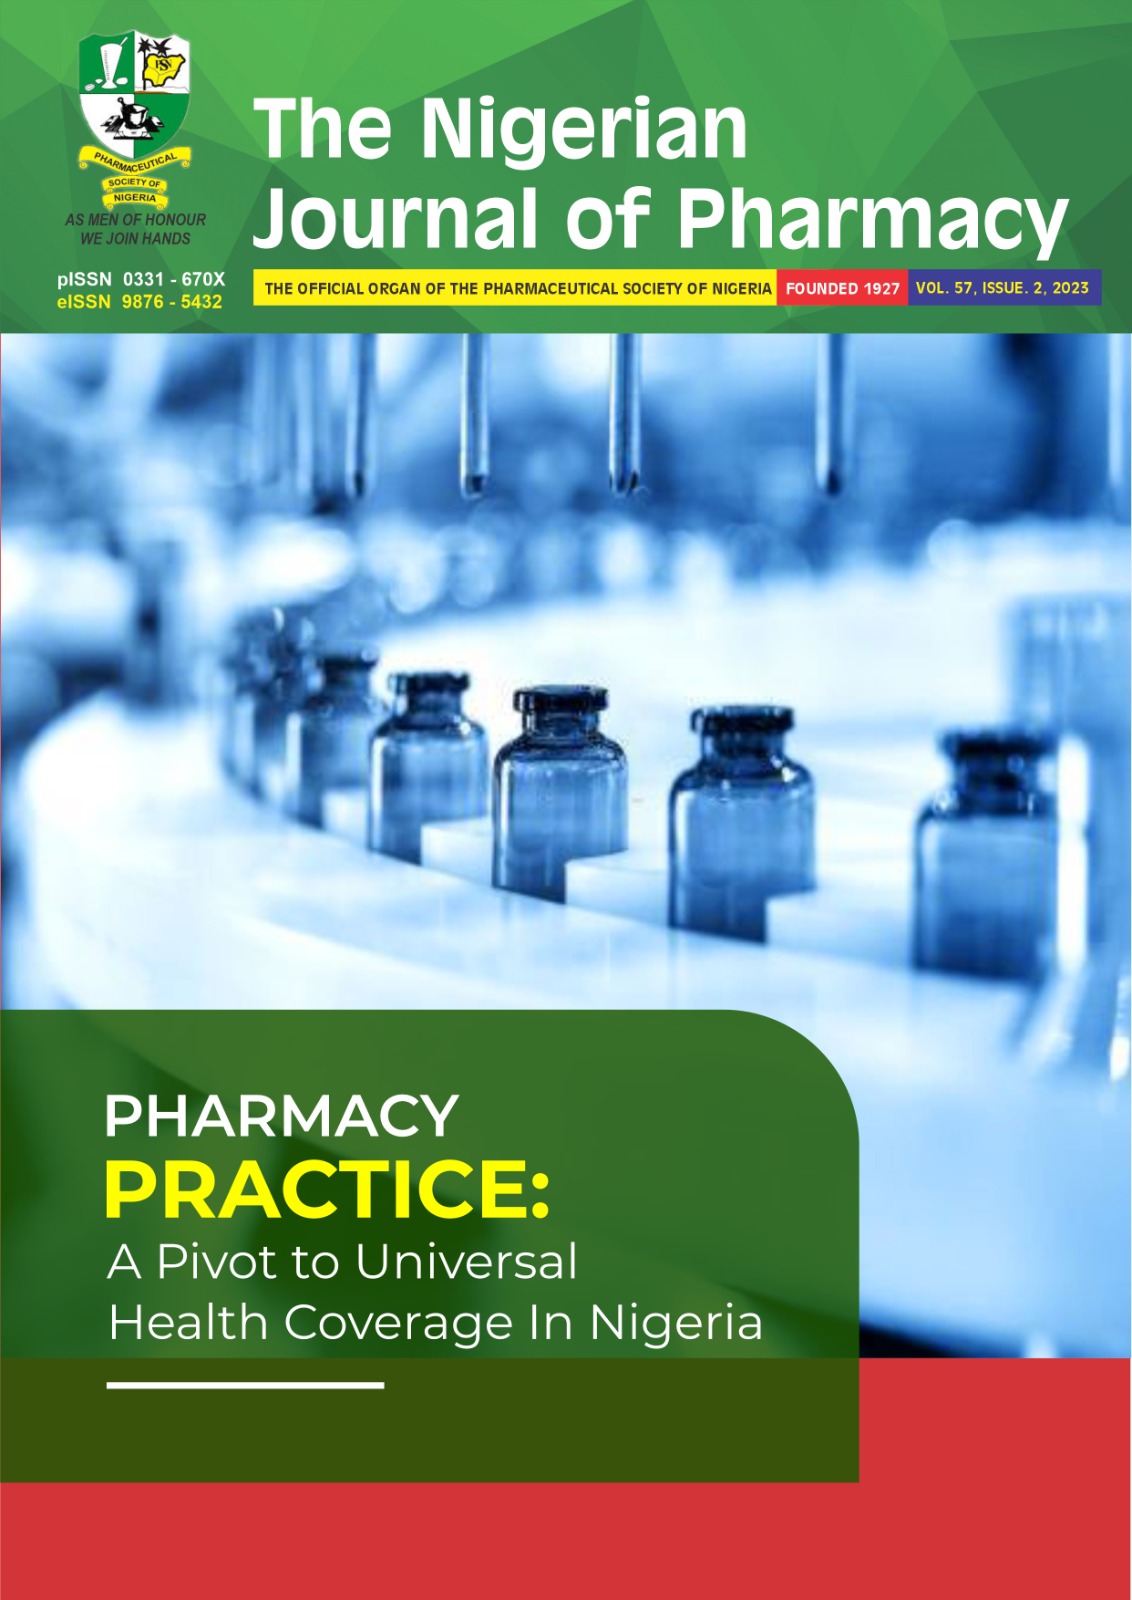 					View Vol. 57 No. 2 (2023): The Nigerian Journal of Pharmacy
				